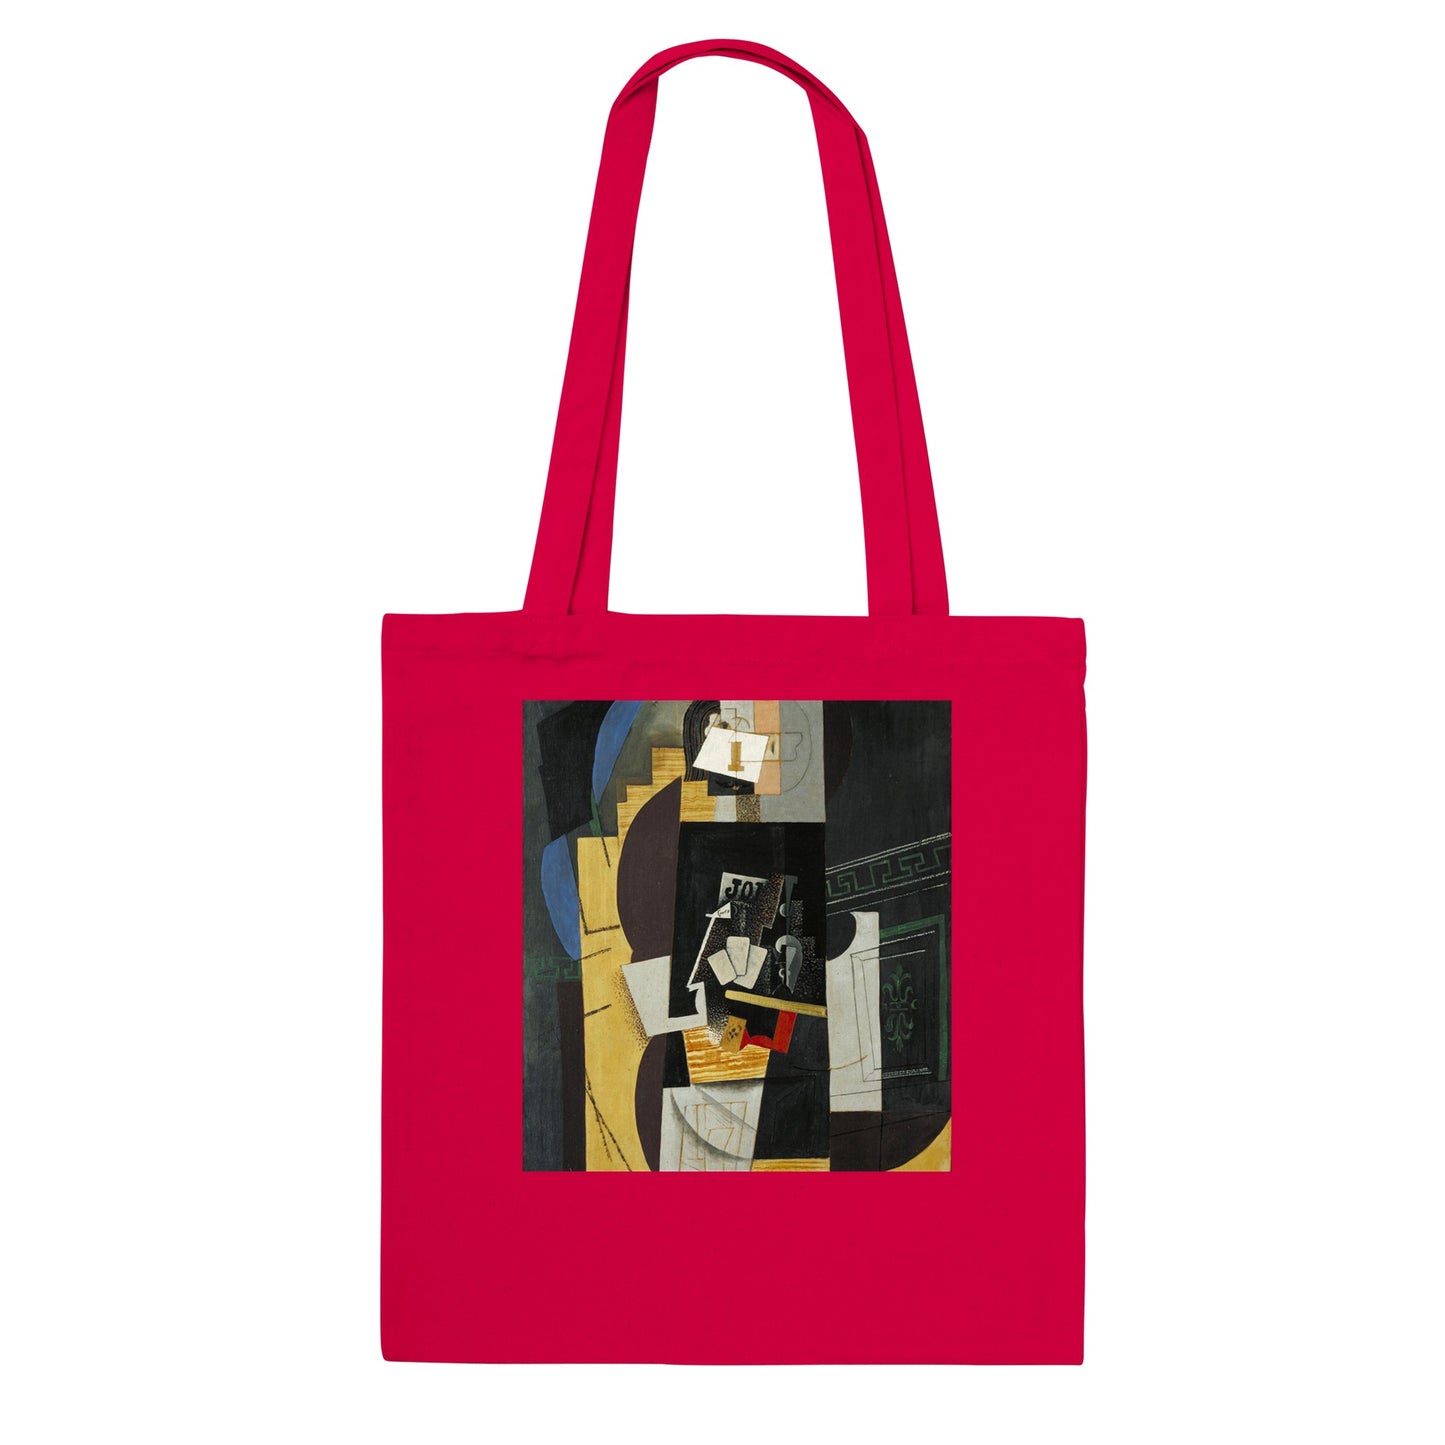 PABLO PICASSO - CARD PLAYER - CLASSIC TOTE BAG